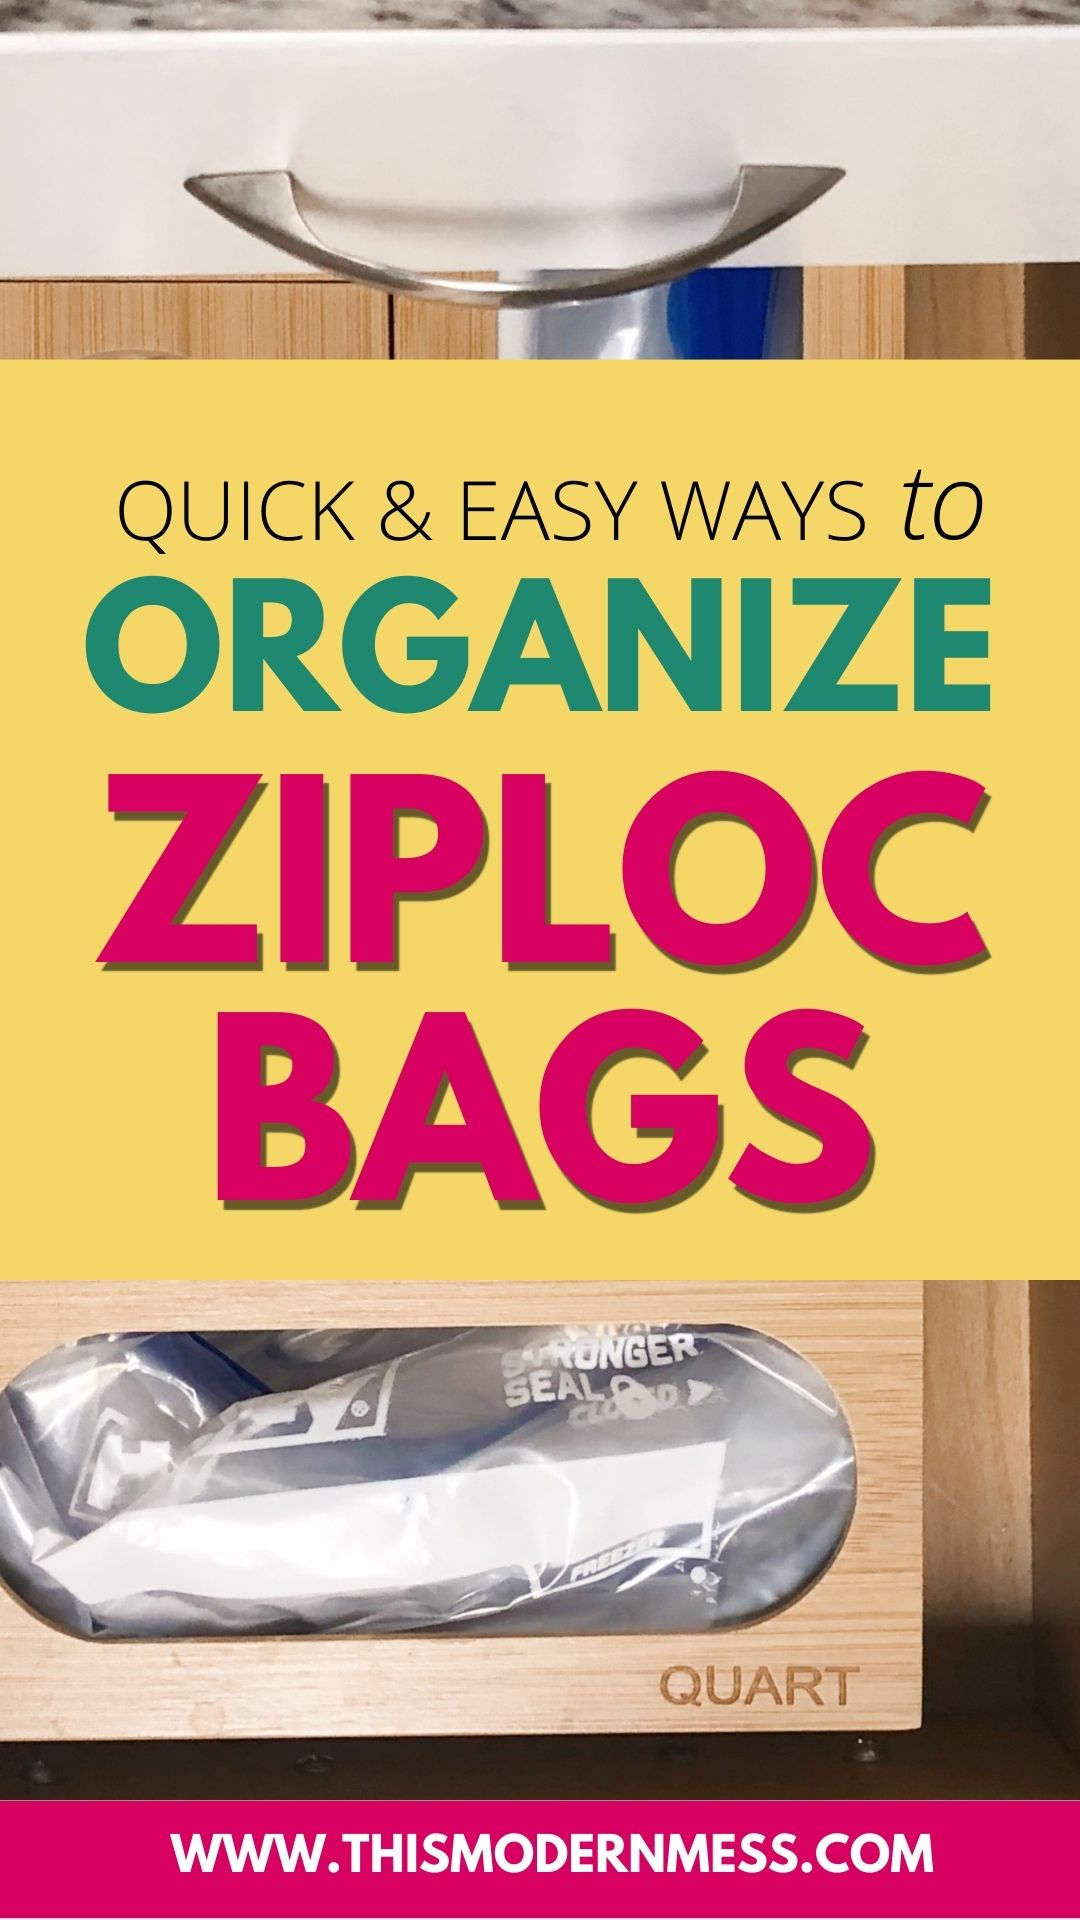 Organizing Ziploc bags example of a drawer with organizers and storage bag. Text overlay reads: "Quick and easy ways to organize Ziploc bags"